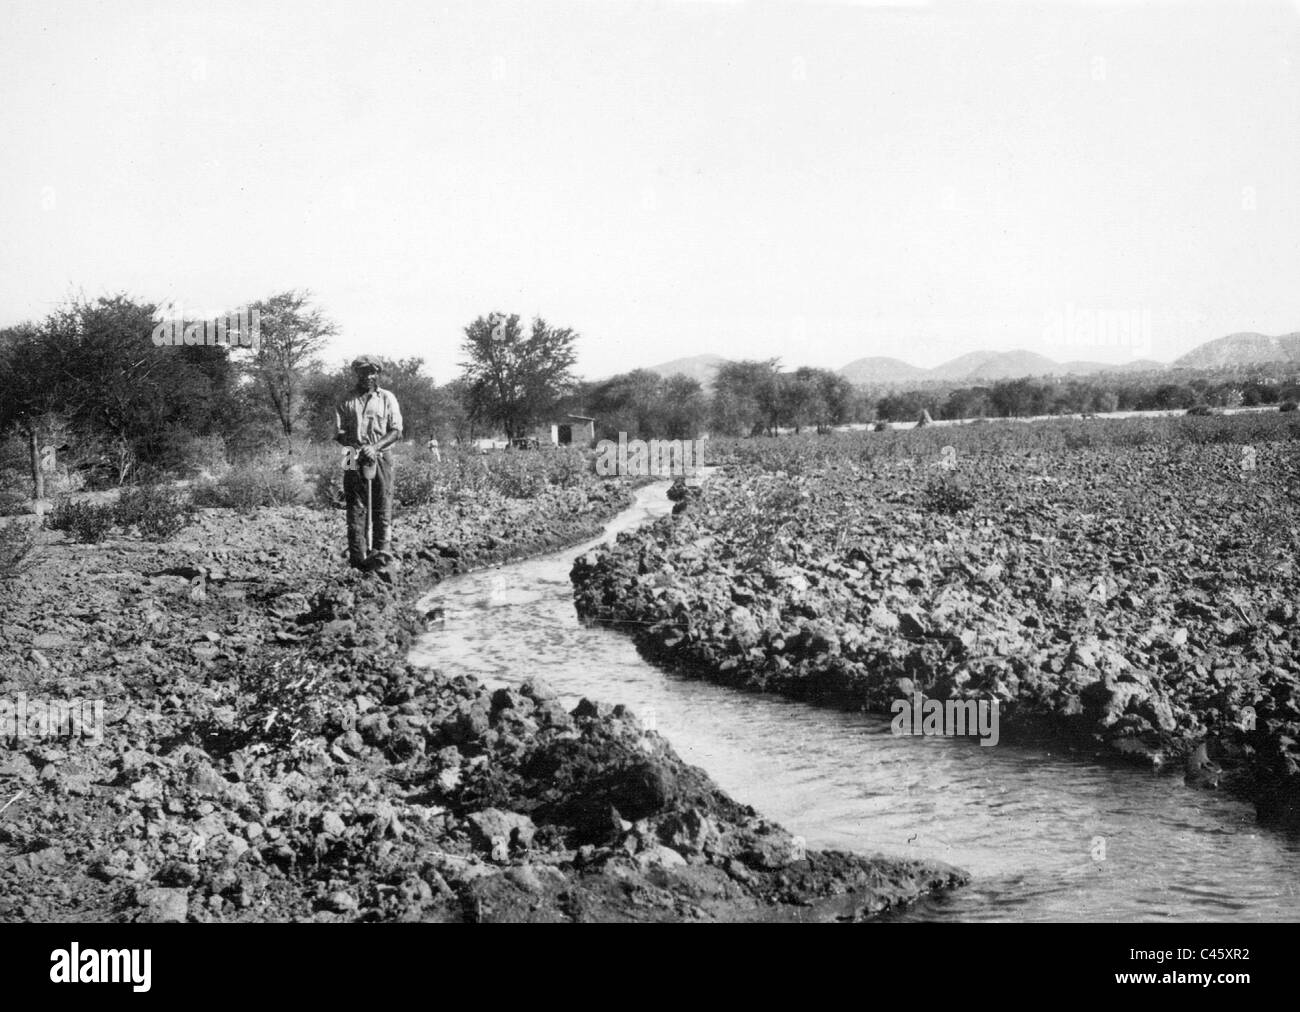 Agriculture in the former German Southwest Africa, 1935 Stock Photo